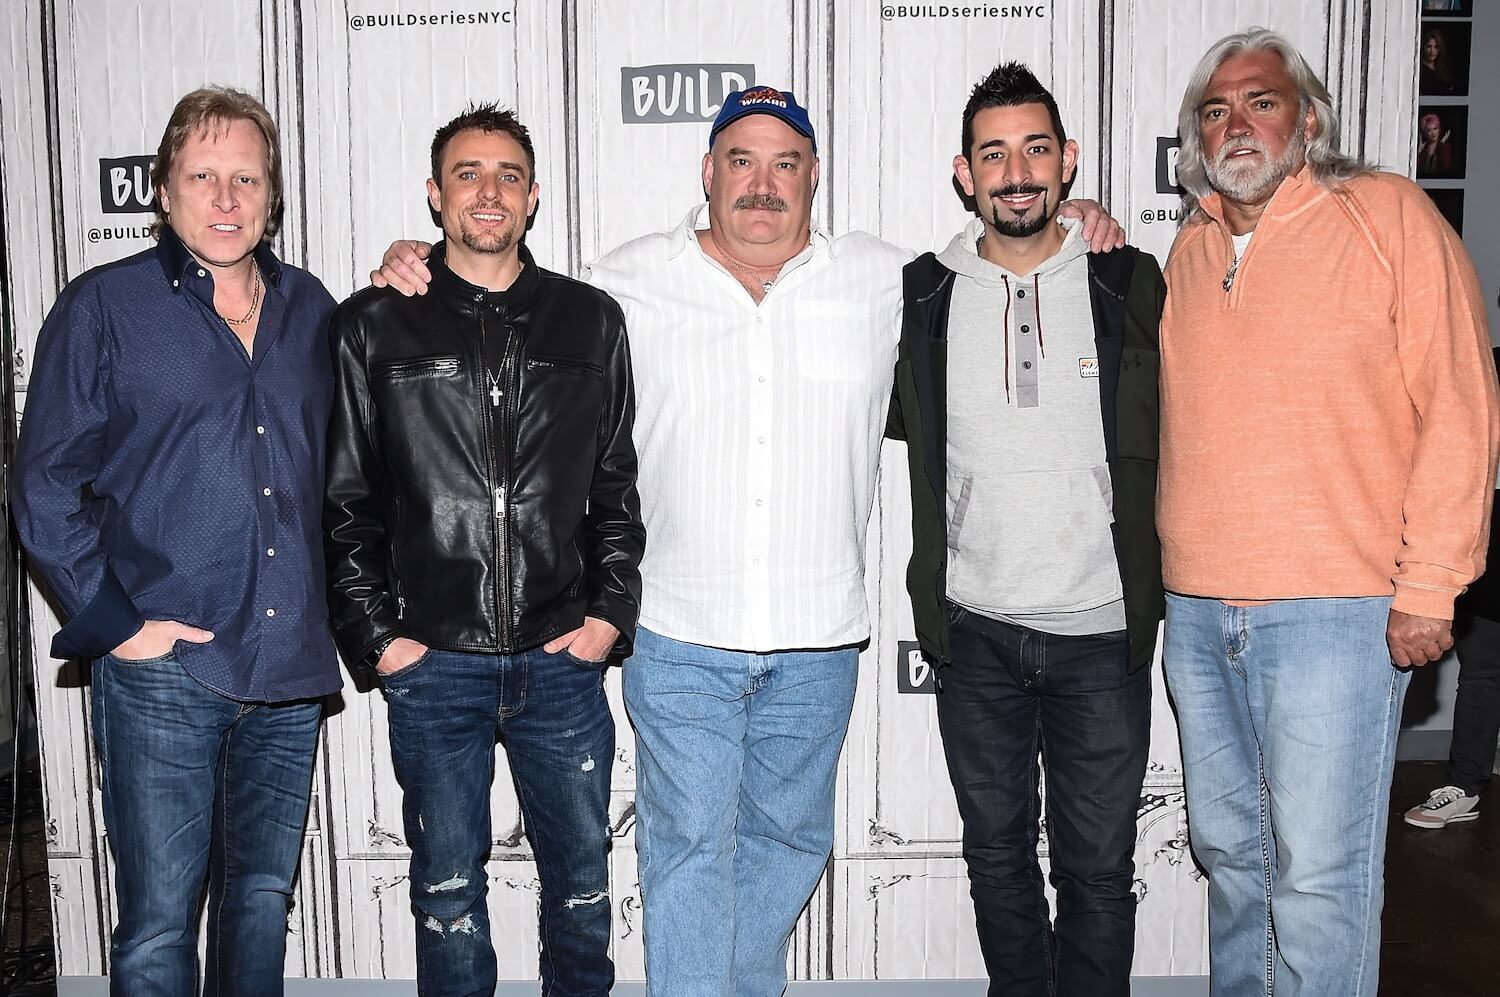 Sig Hansen, Jake Anderson, Keith Colburn, Josh Harris, and Wild Bill Wichrowski from 'Deadliest Catch' Season 19 standing next to each other and smiling